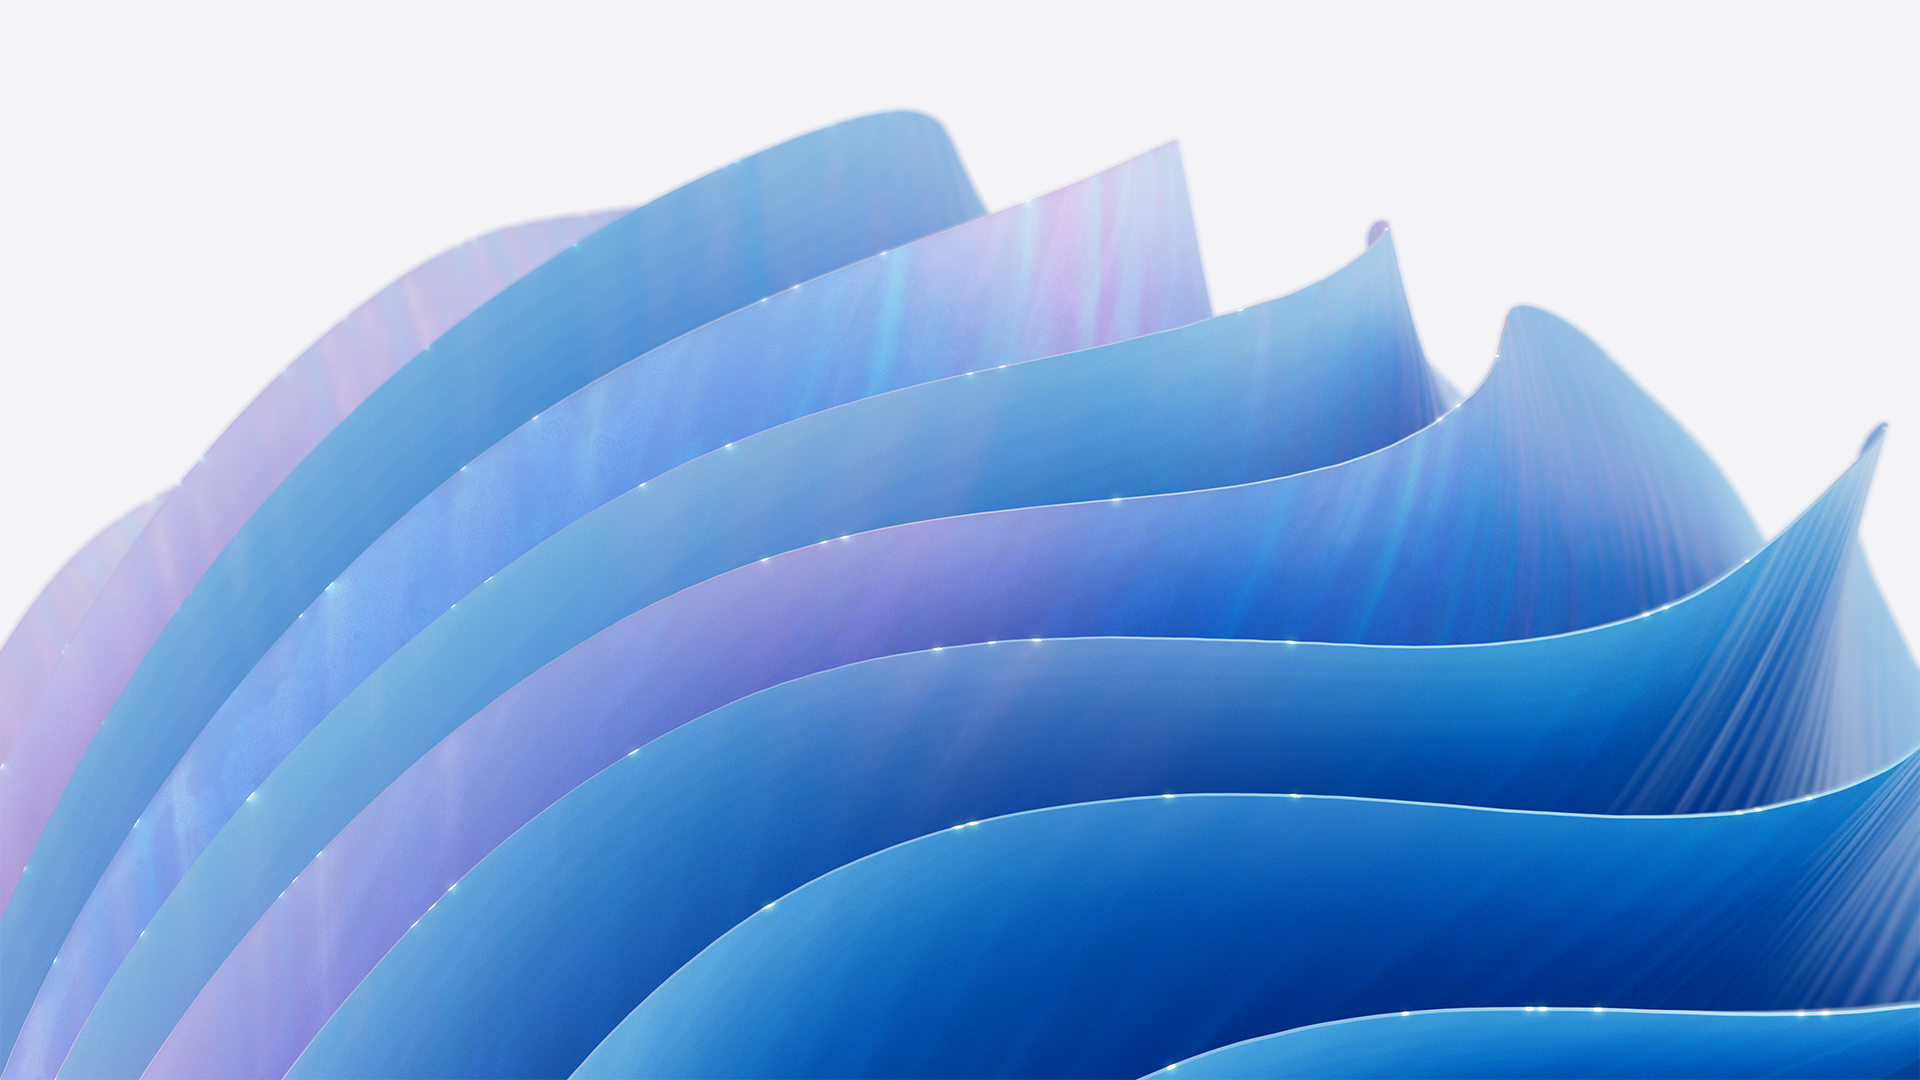 conceptual image of blue waves